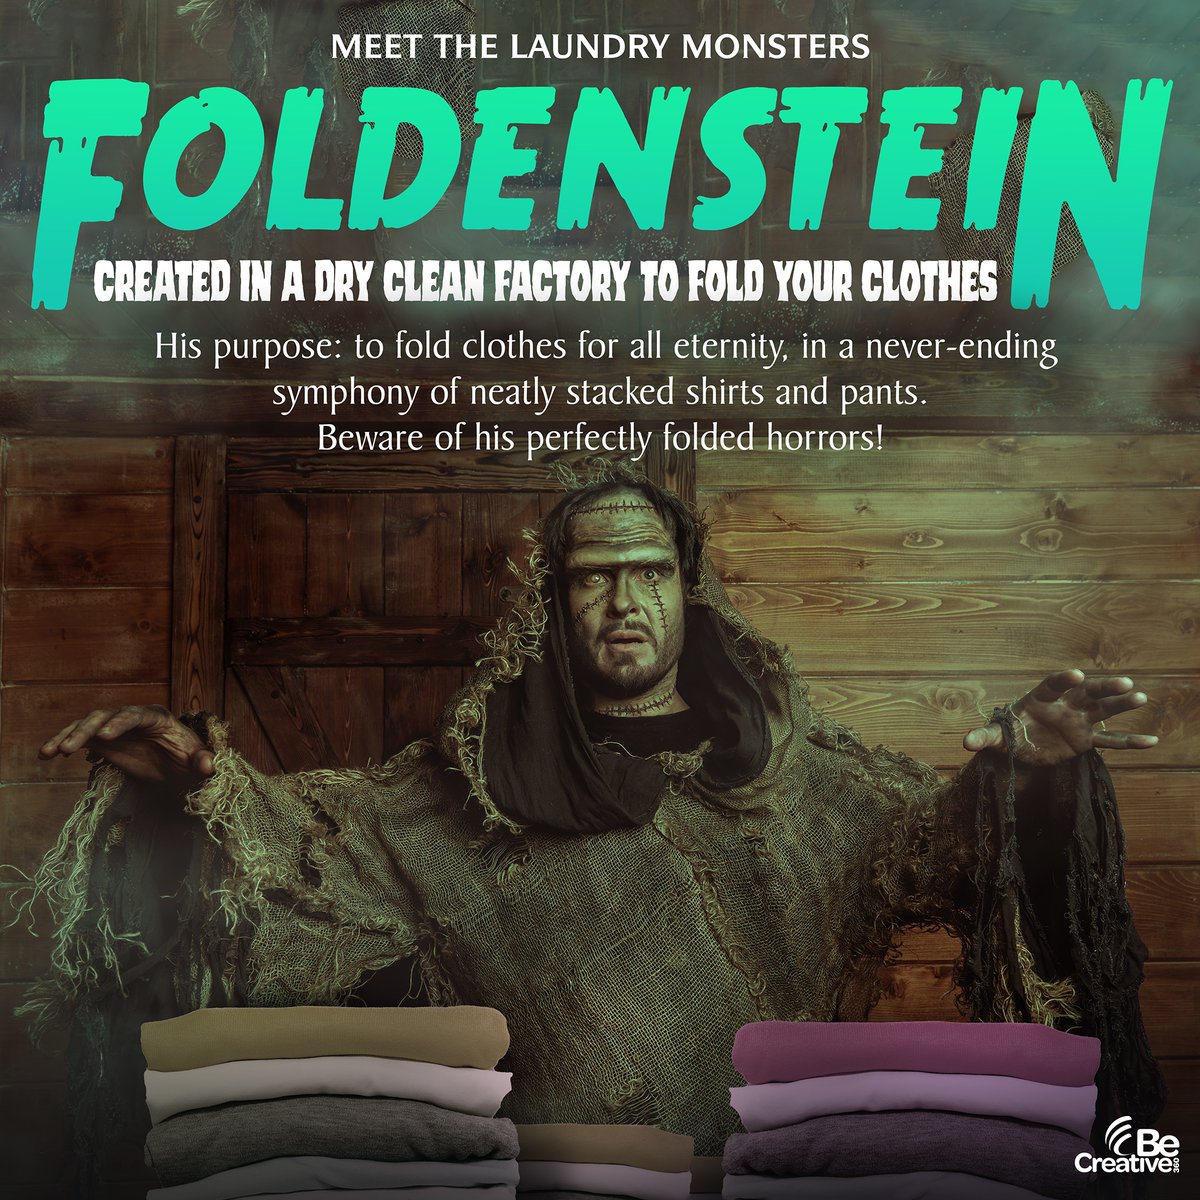 Meet one of our #laundrymonsters - Foldenstein! Created in a dry cleaning factory, this monster has one goal - to provide you with perfectly folded clothing. It's almost scary... how perfect Foldenstein can fold!🧟‍♂️ Visit foxcleaners.com to get scary good deals today.